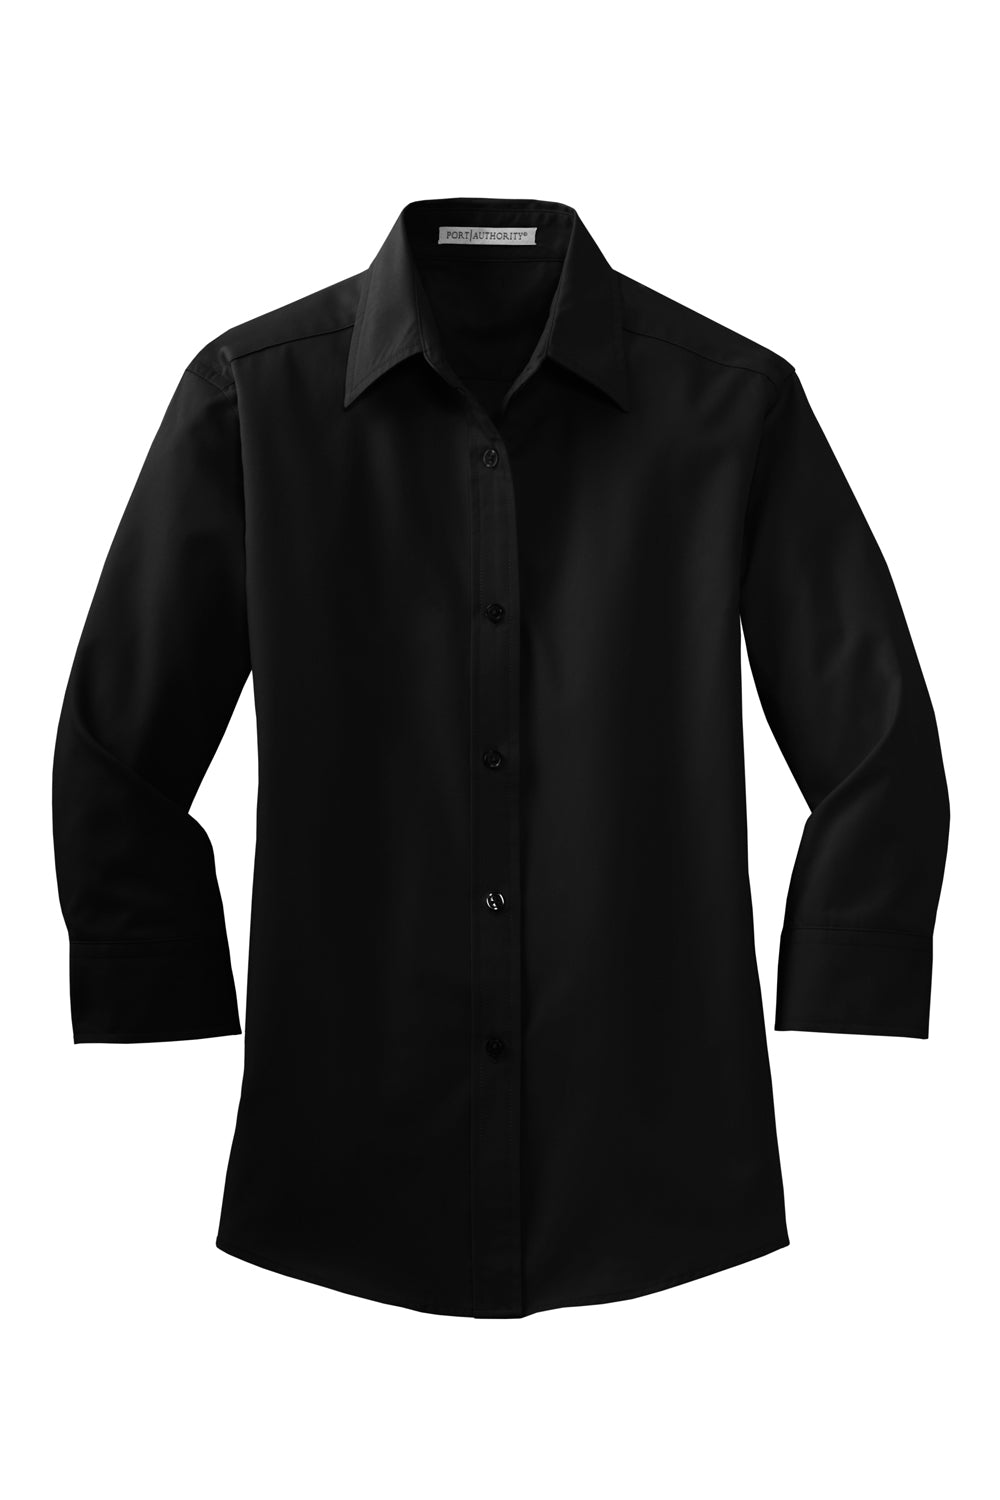 Port Authority L612 Womens Easy Care Wrinkle Resistant 3/4 Sleeve Button Down Shirt Black Flat Front